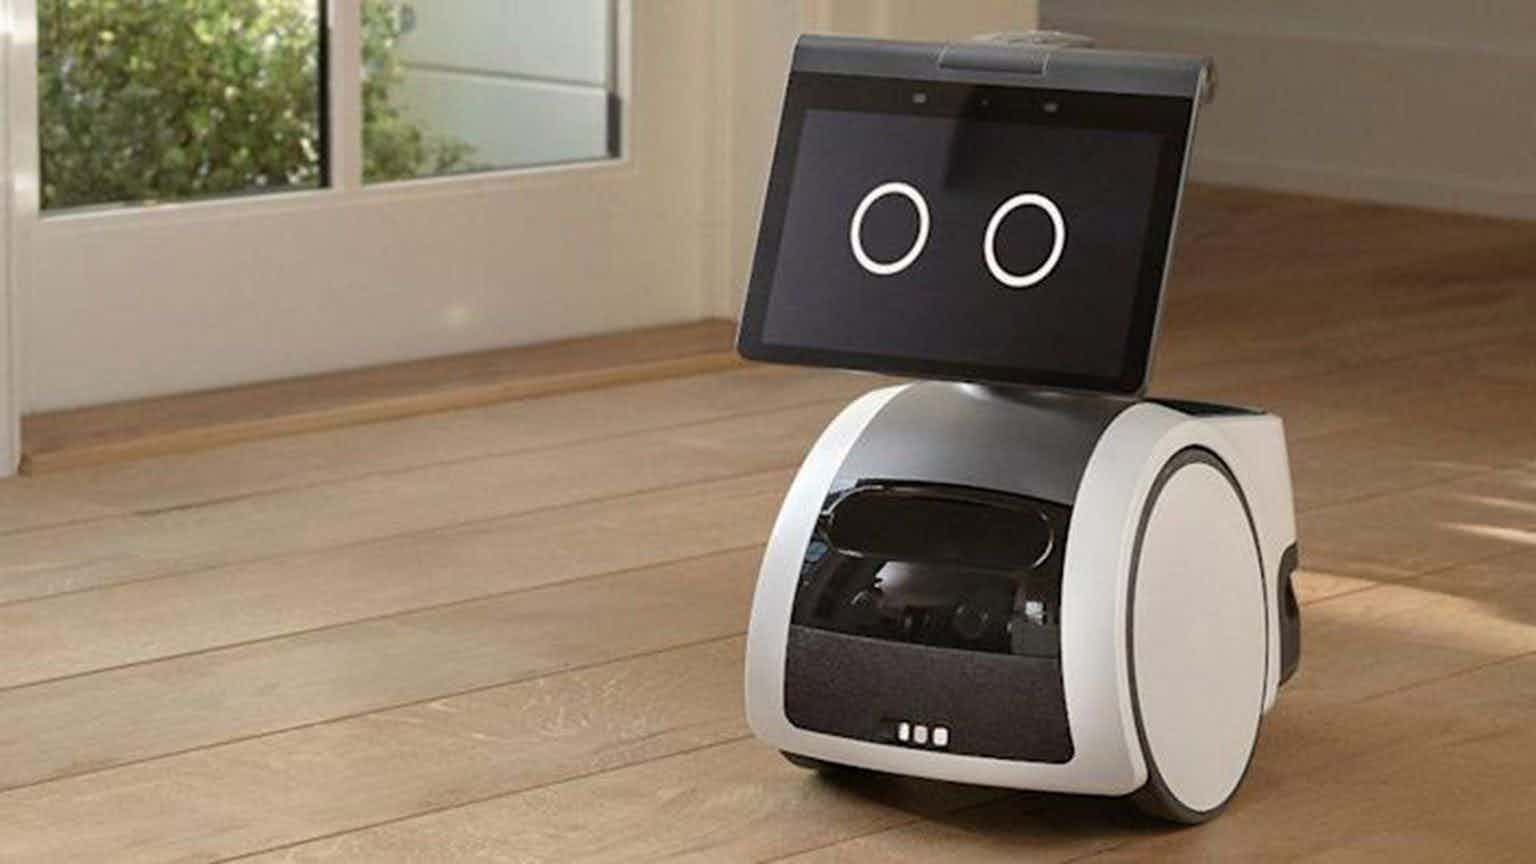 Amazing house assistant! Amazon unveils ‘Astro,’ the household robot photo from Yahoo News